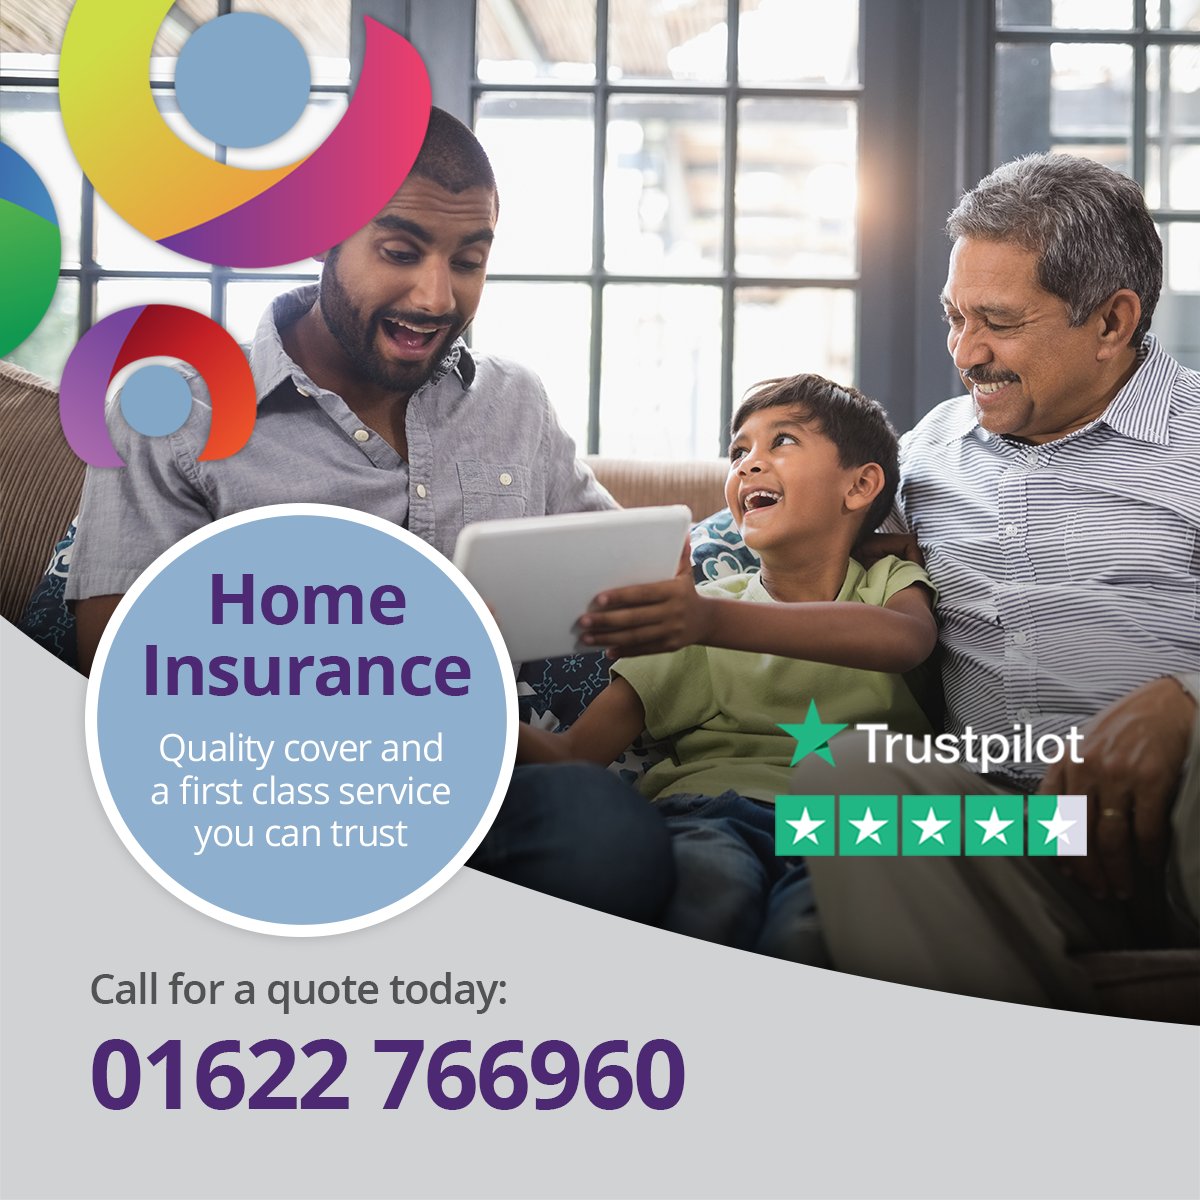 With competitive quotes from a range of different insurers and optional home emergency and family legal cover, why not call us for a quote on your home insurance to see if we can save you money! Read more about our home insurance: csis.co.uk/home-insurance